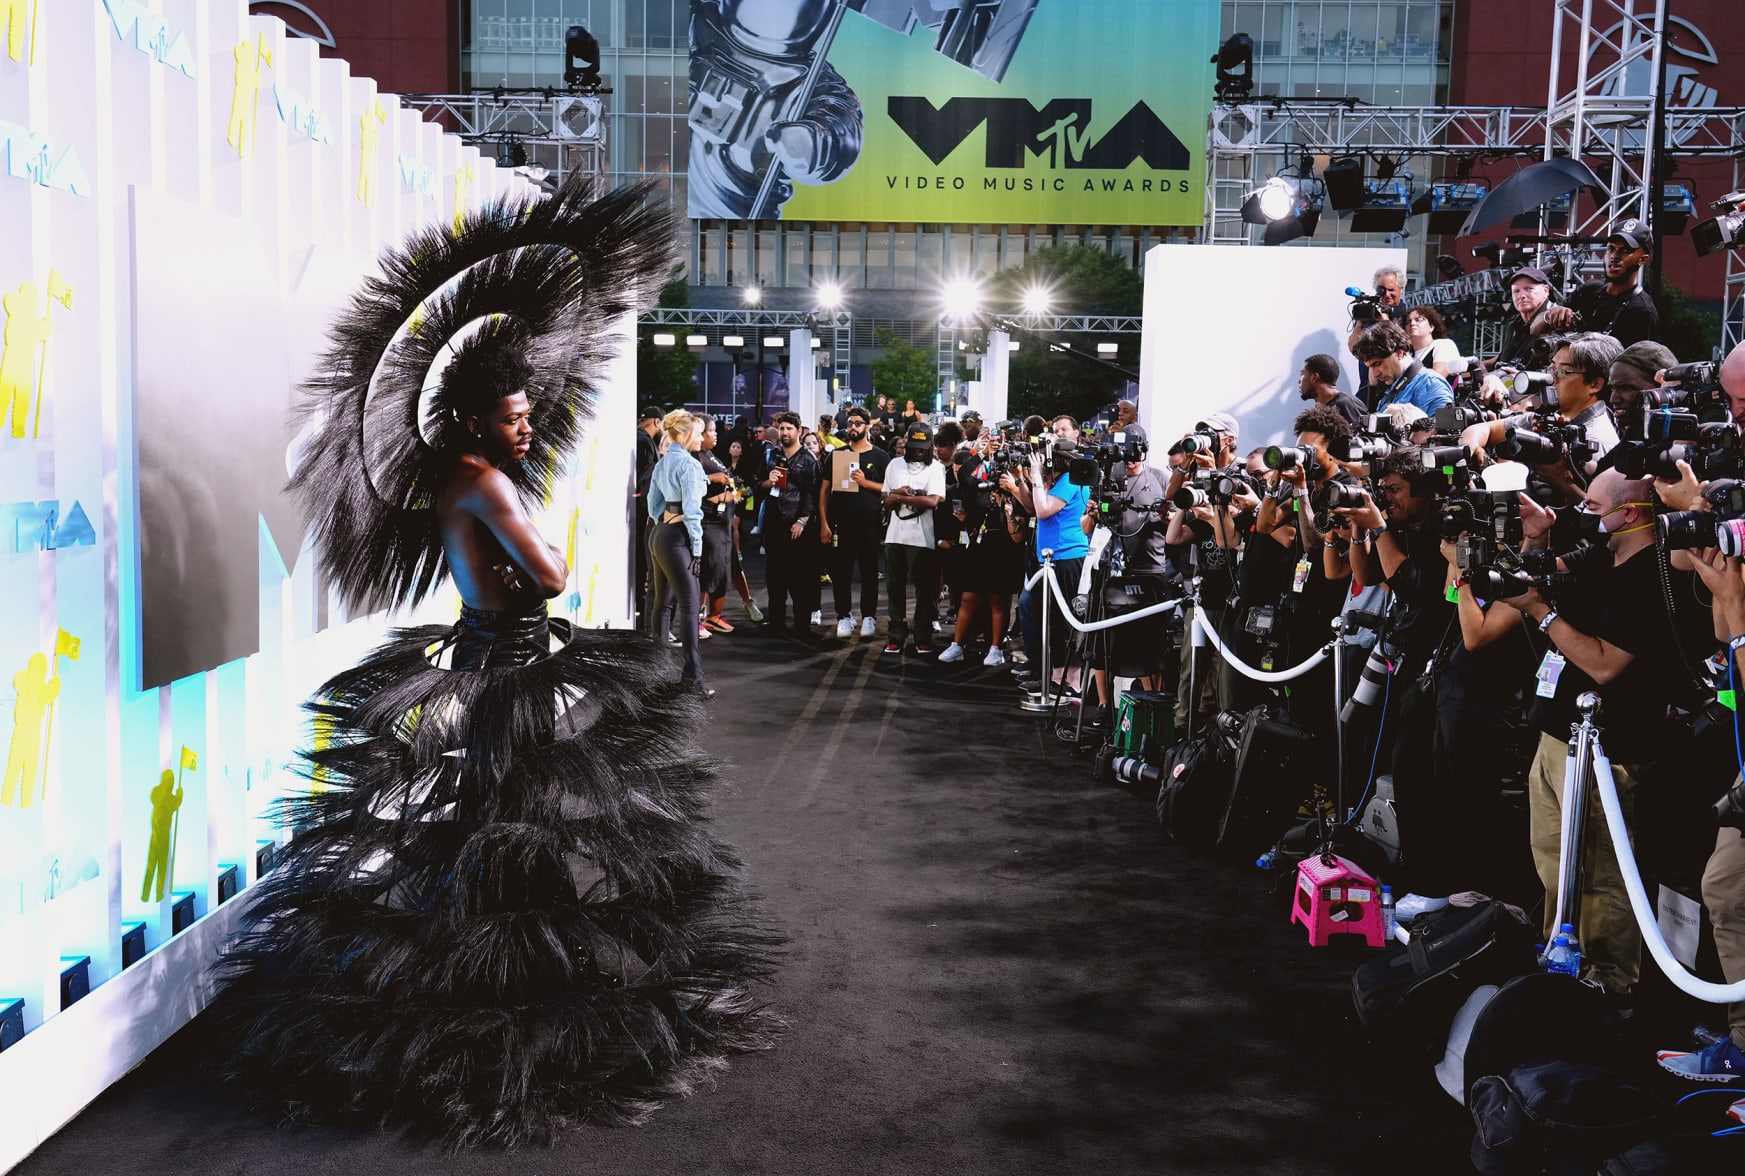 Lil Nas X was a strong contender for best dressed, wearing a sculptural Harris Reed ensemble featuring a tiered feathered skirt frame and headdress.